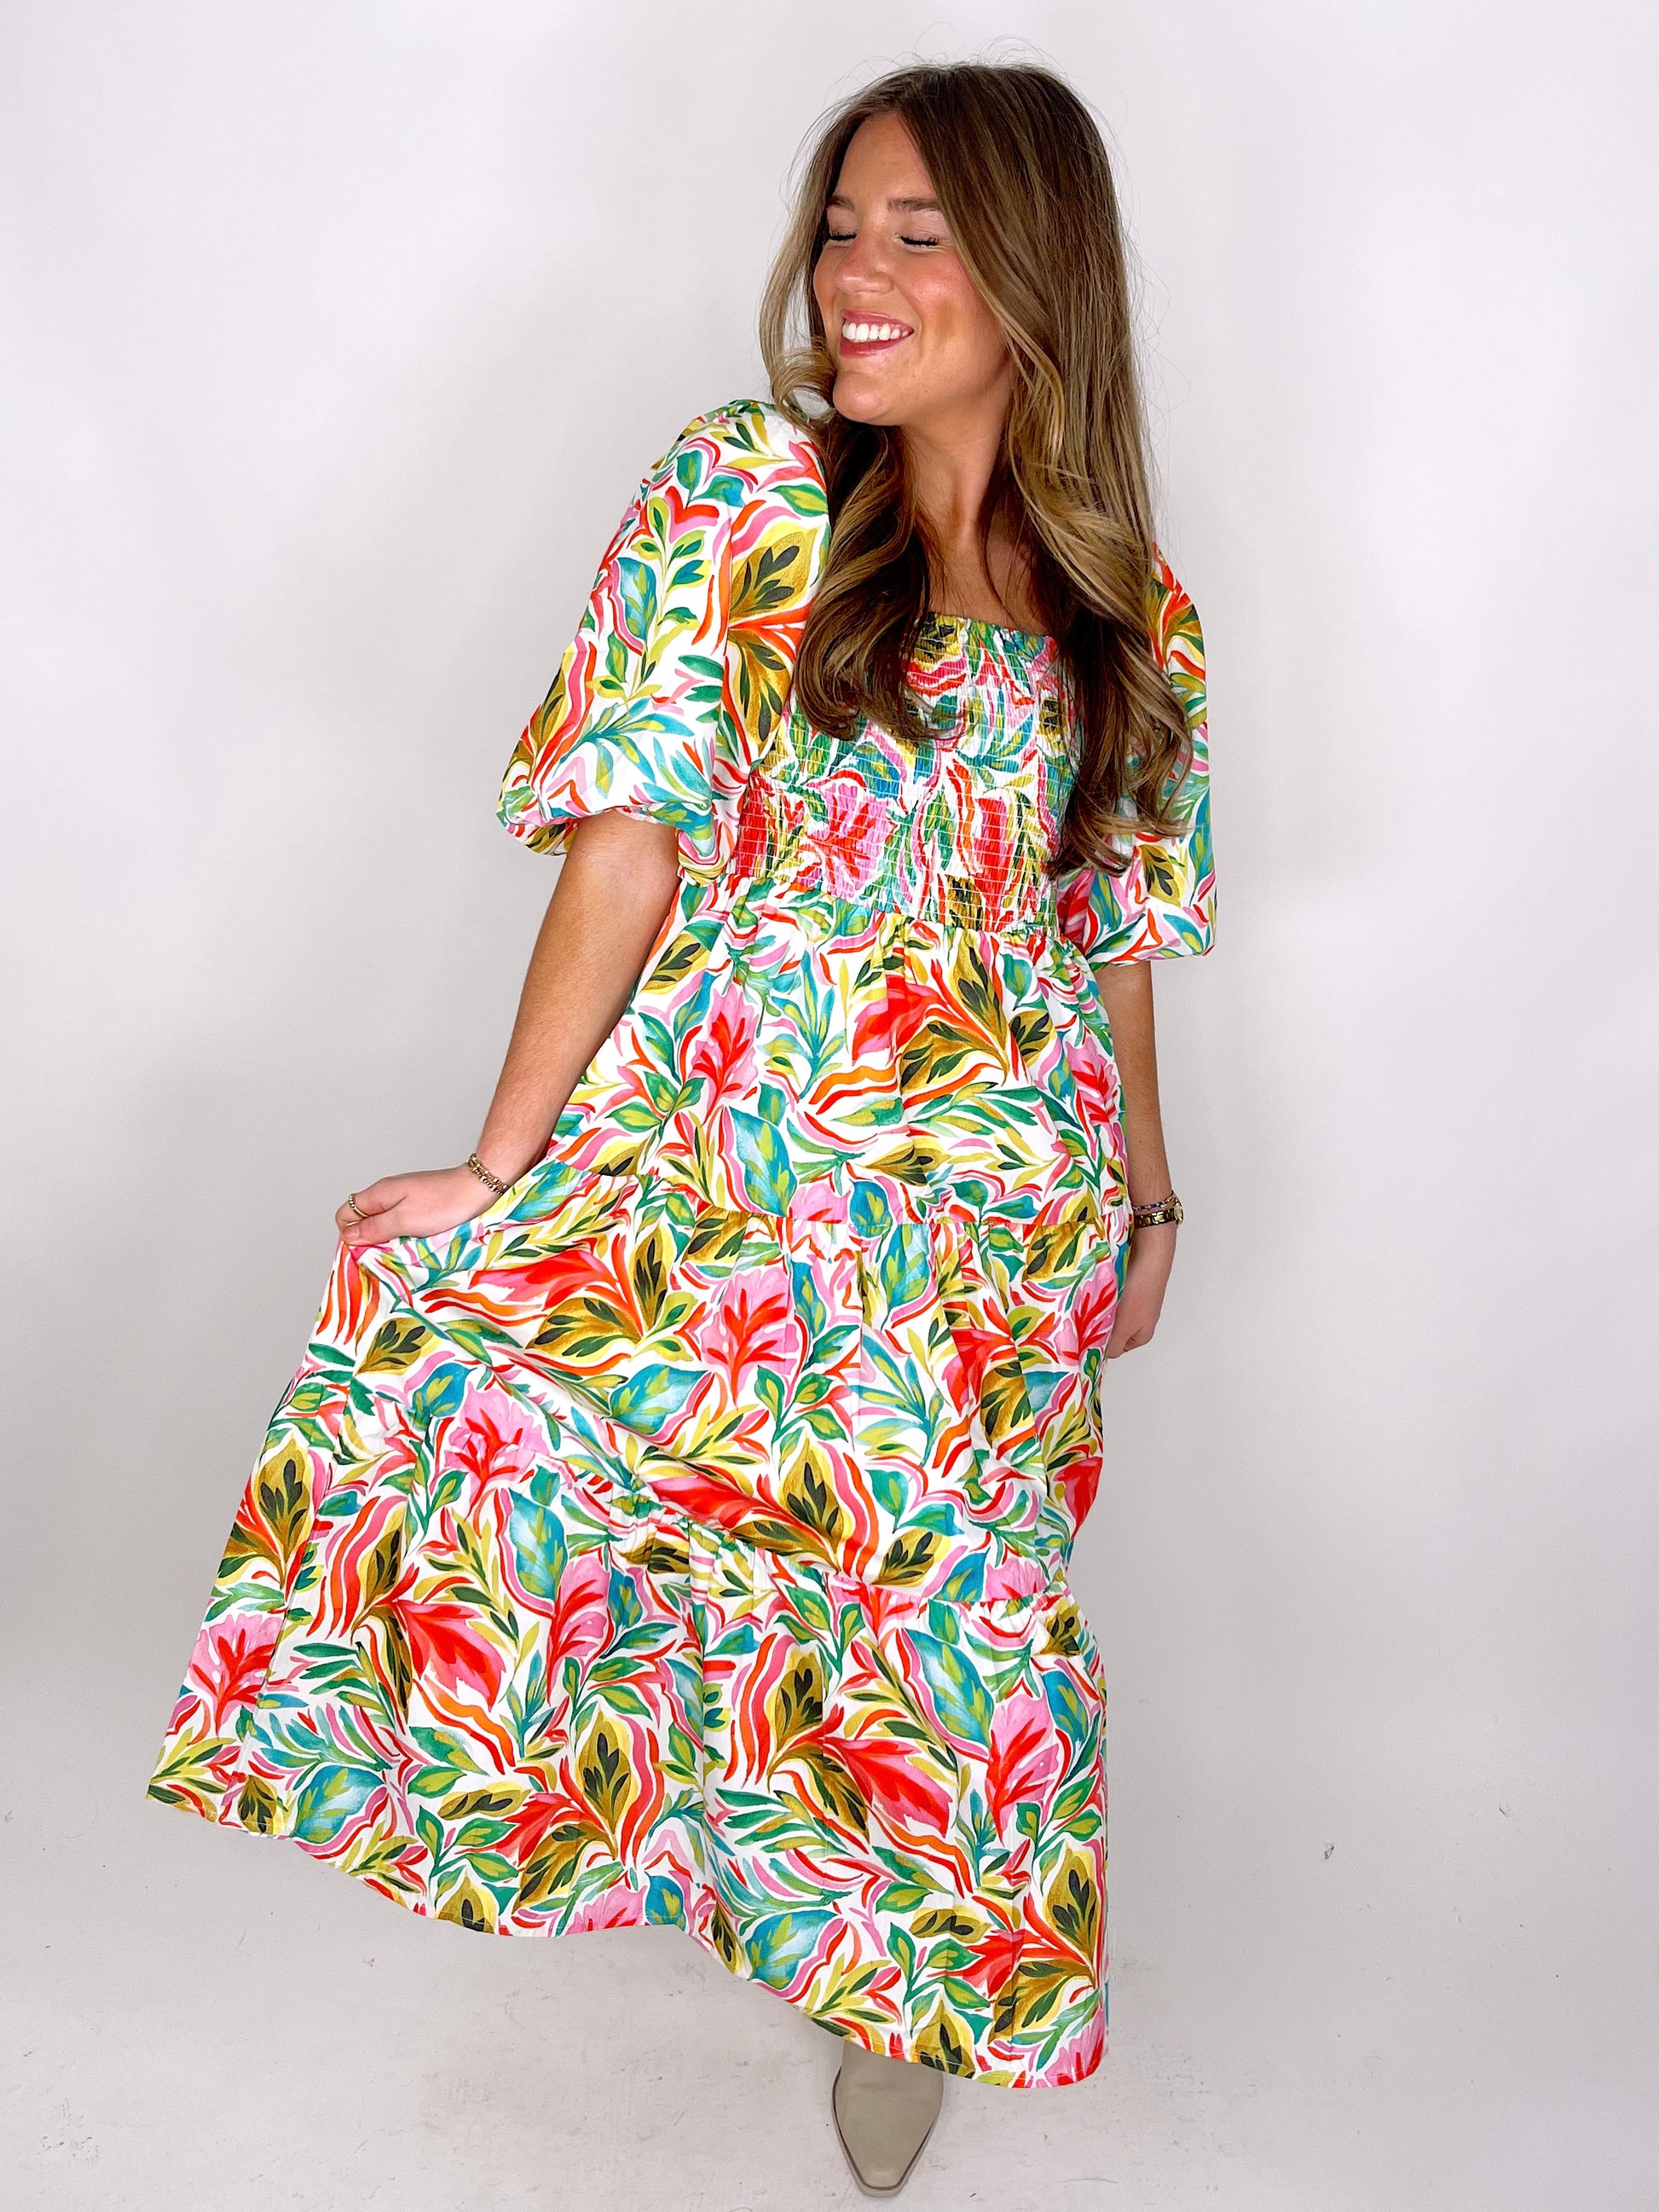 The Isla Dress-Midi Dress-THML-The Village Shoppe, Women’s Fashion Boutique, Shop Online and In Store - Located in Muscle Shoals, AL.